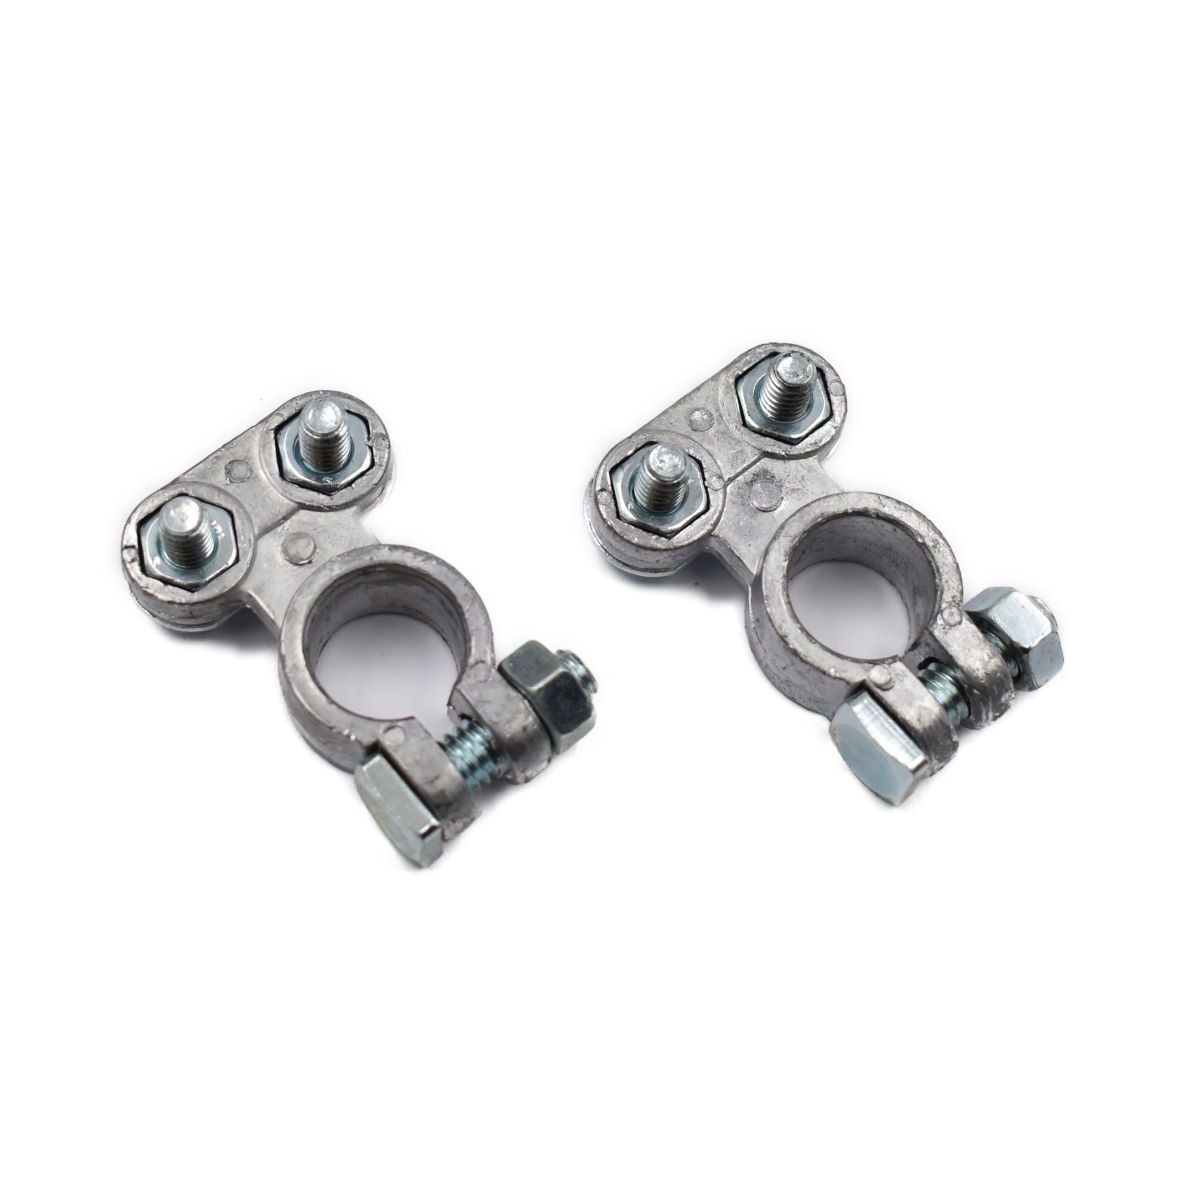 BATTERY CLAMPS UNIVERSAL FOR NORMAL POLES Extra info: Set of 2 pieces DIN poles (16 and 18 mm)